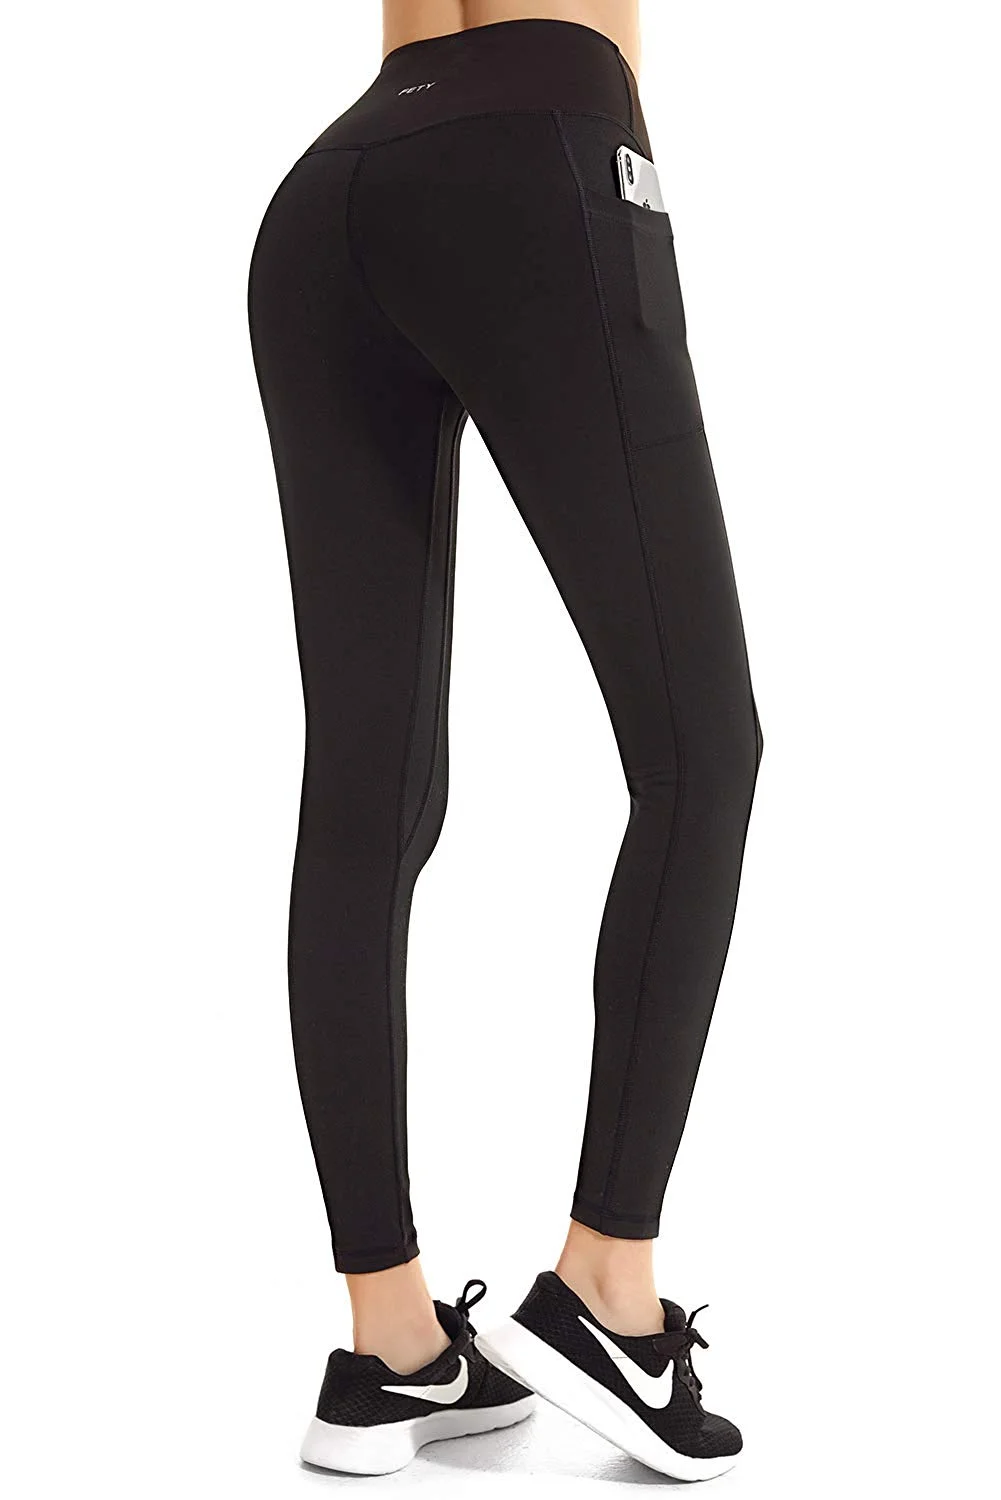 spandex leggings : FETY Women's Workout Leggings with Pockets High